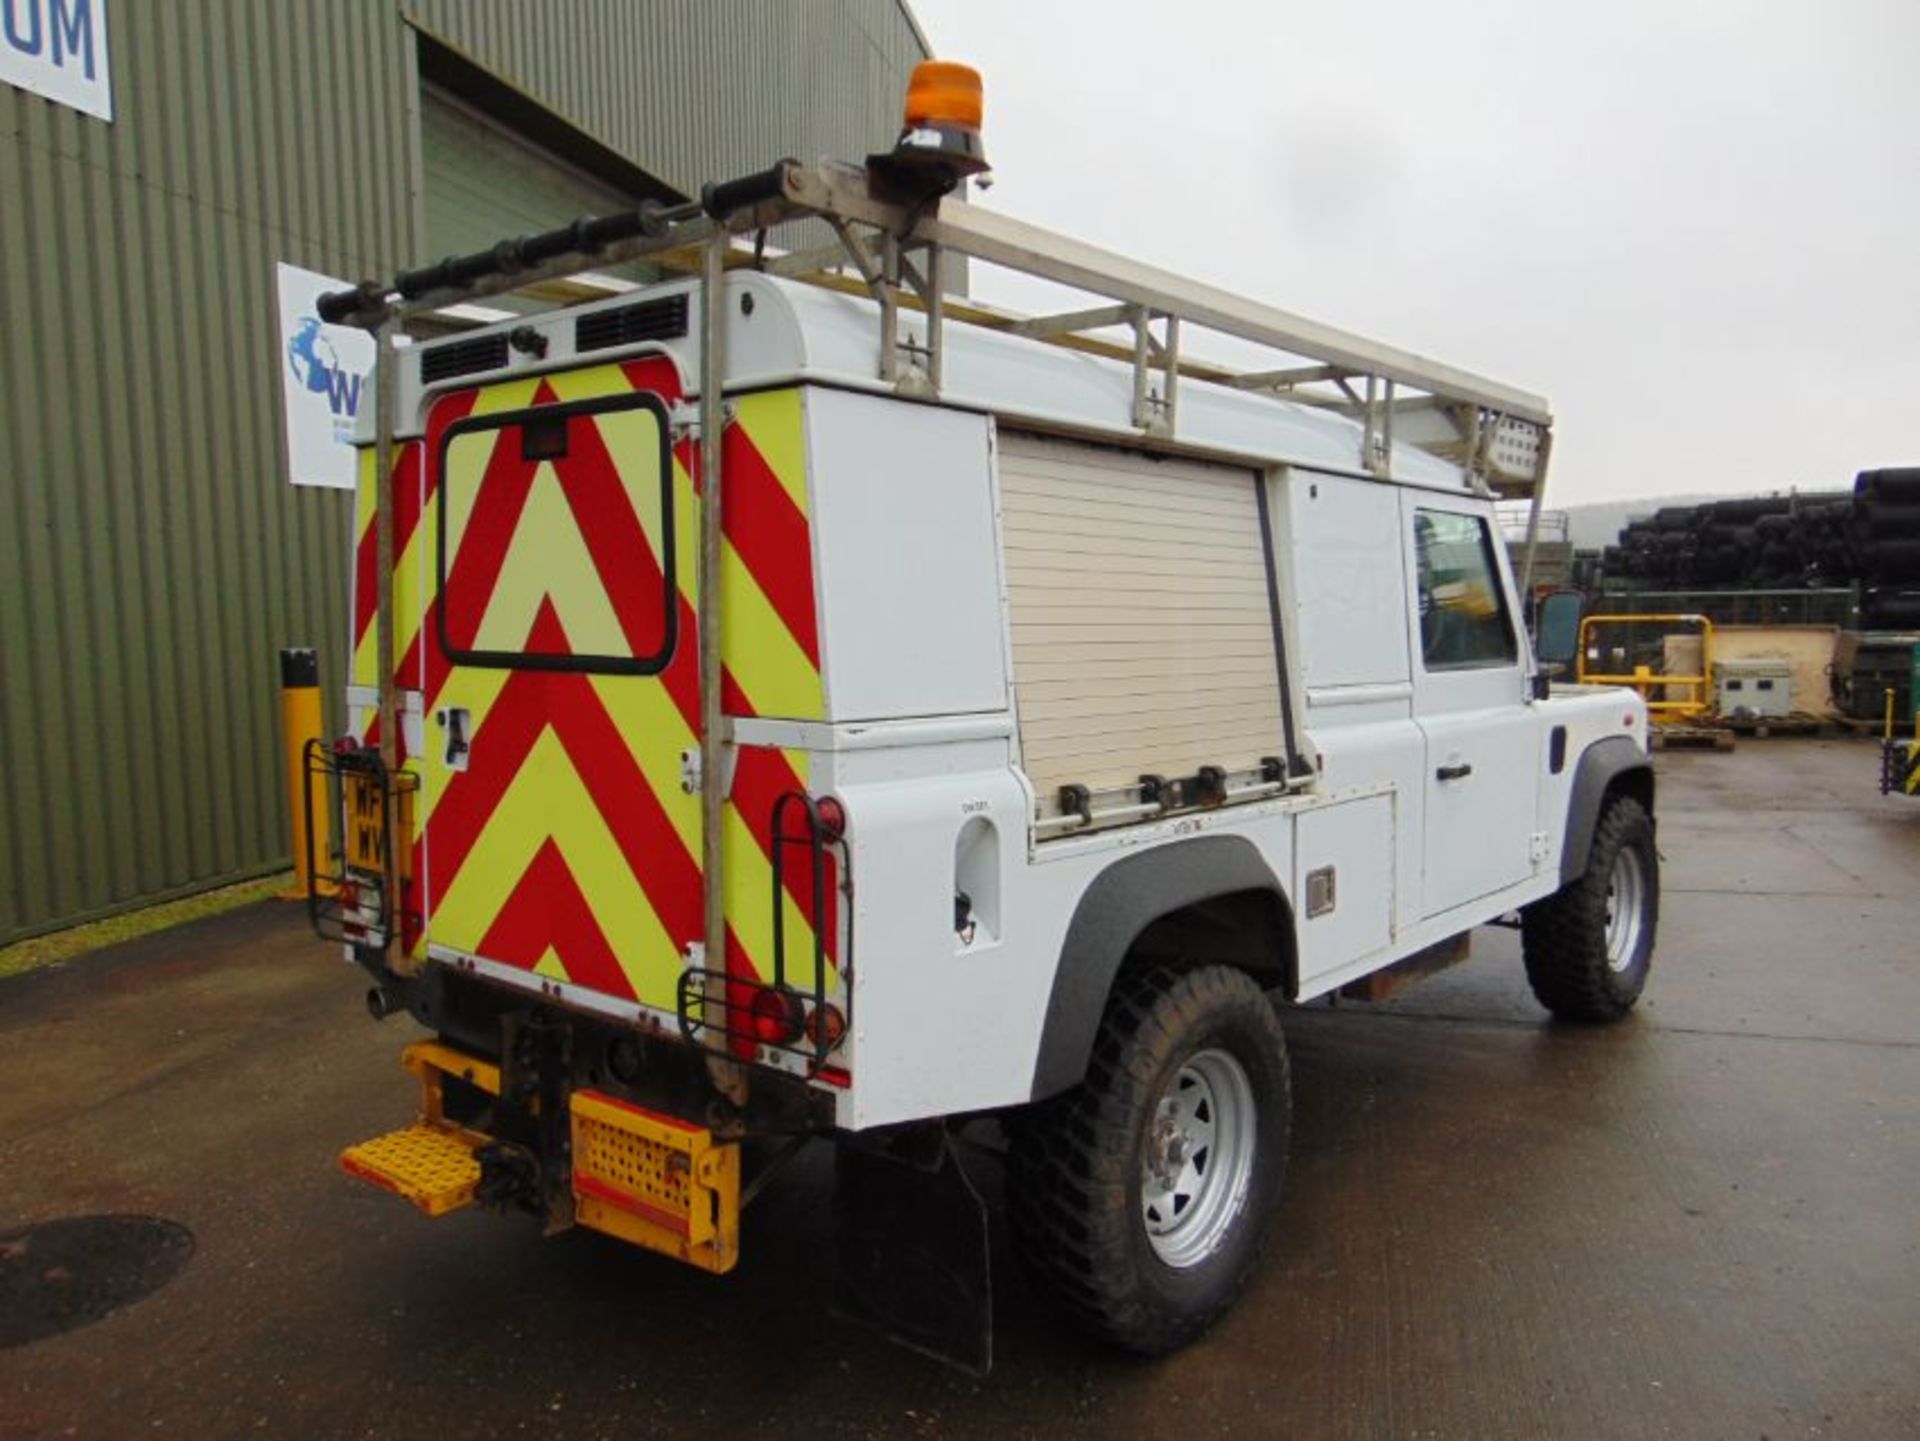 2011 Land Rover Defender 110 Puma hardtop 4x4 mobile workshop with Winch Etc. From UK Utility Co. - Image 6 of 31